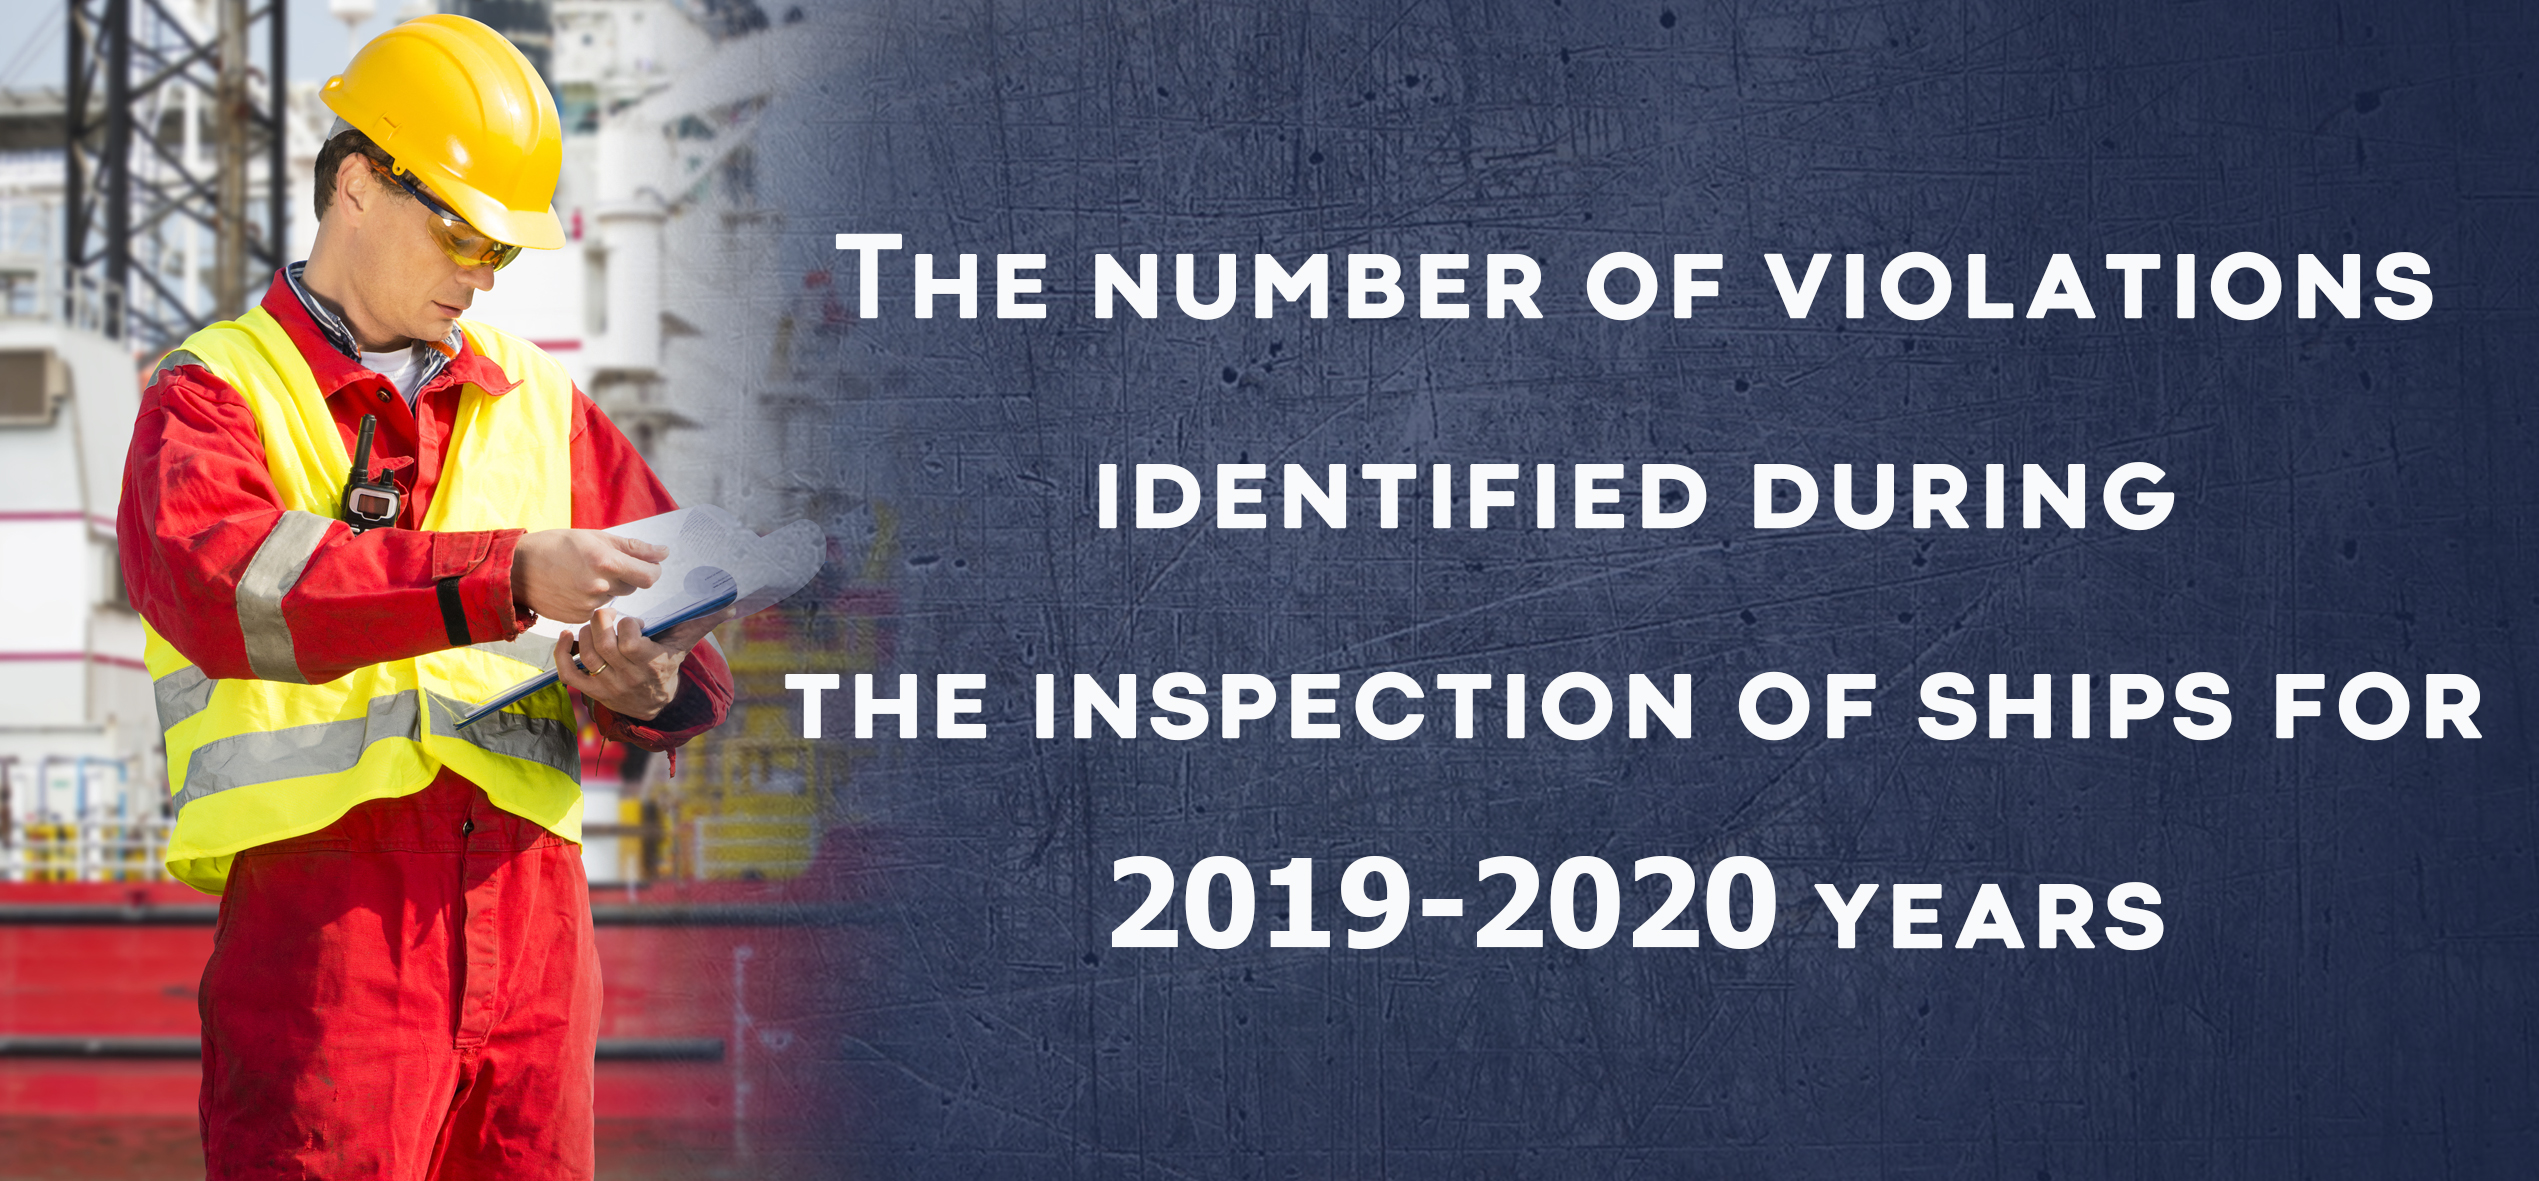 PSC Inspection Analysis (2019-2020)